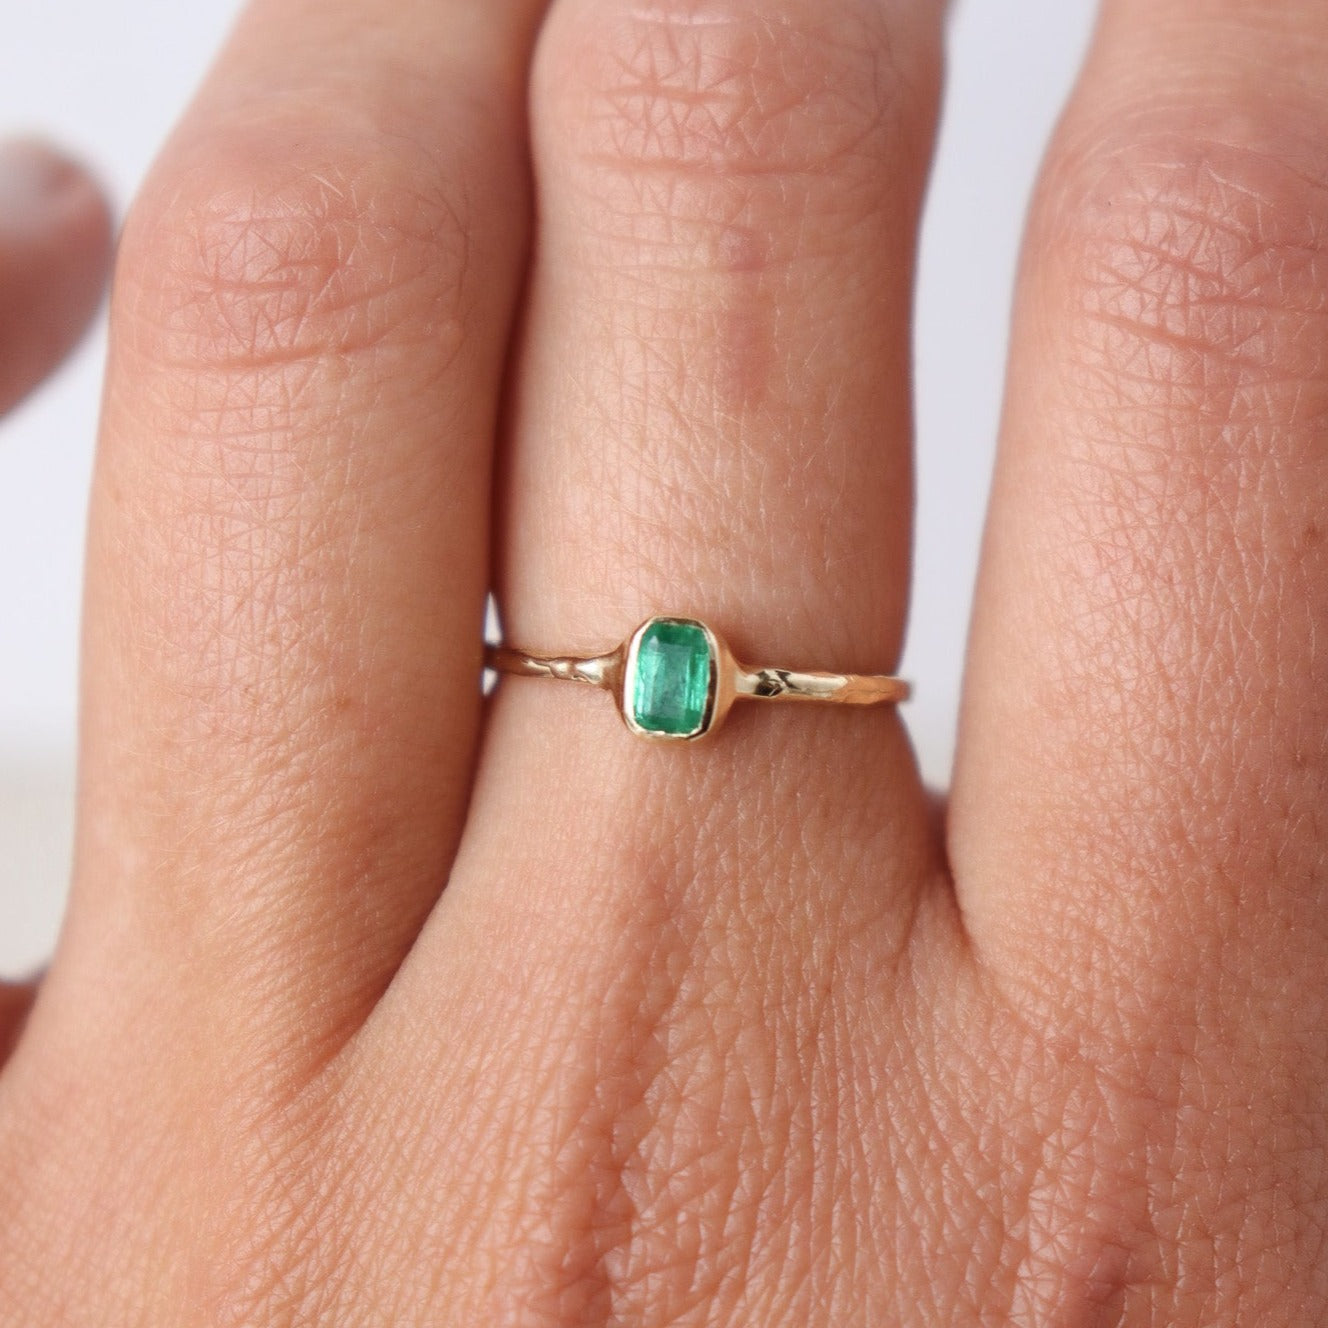 Mini emerald ring elegantly worn on a finger, showcasing its vibrant green gemstone and delicate gold band